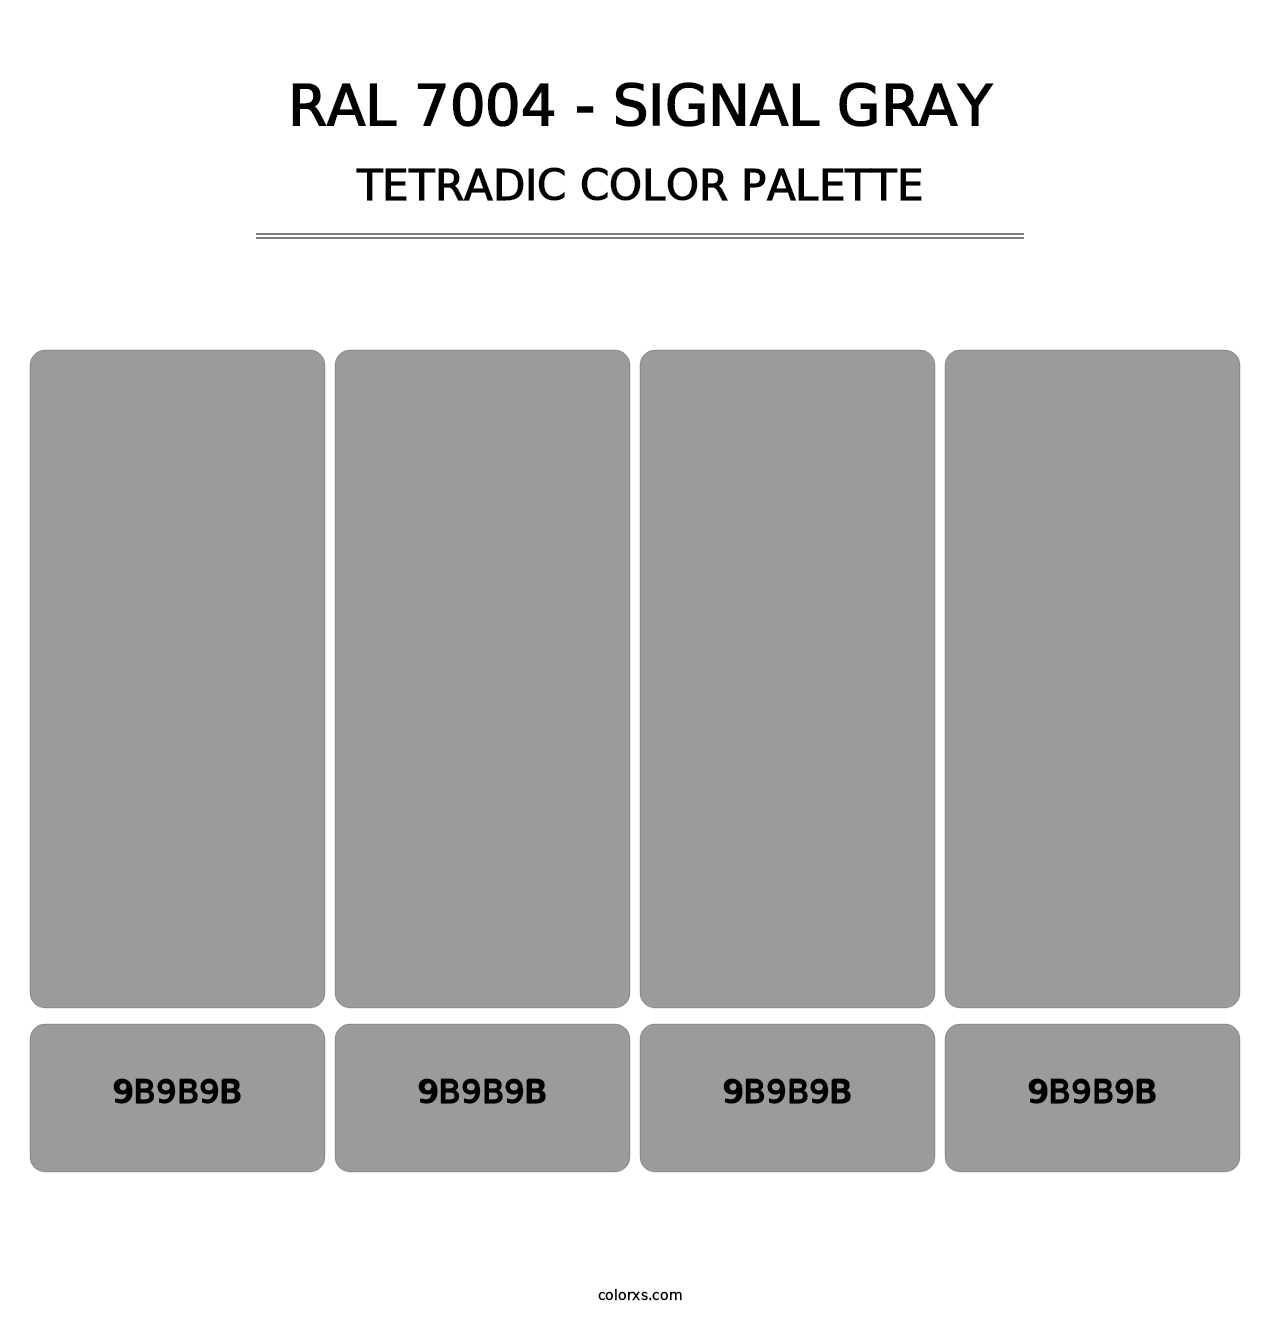 RAL 7004 - Signal Gray - Tetradic Color Palette